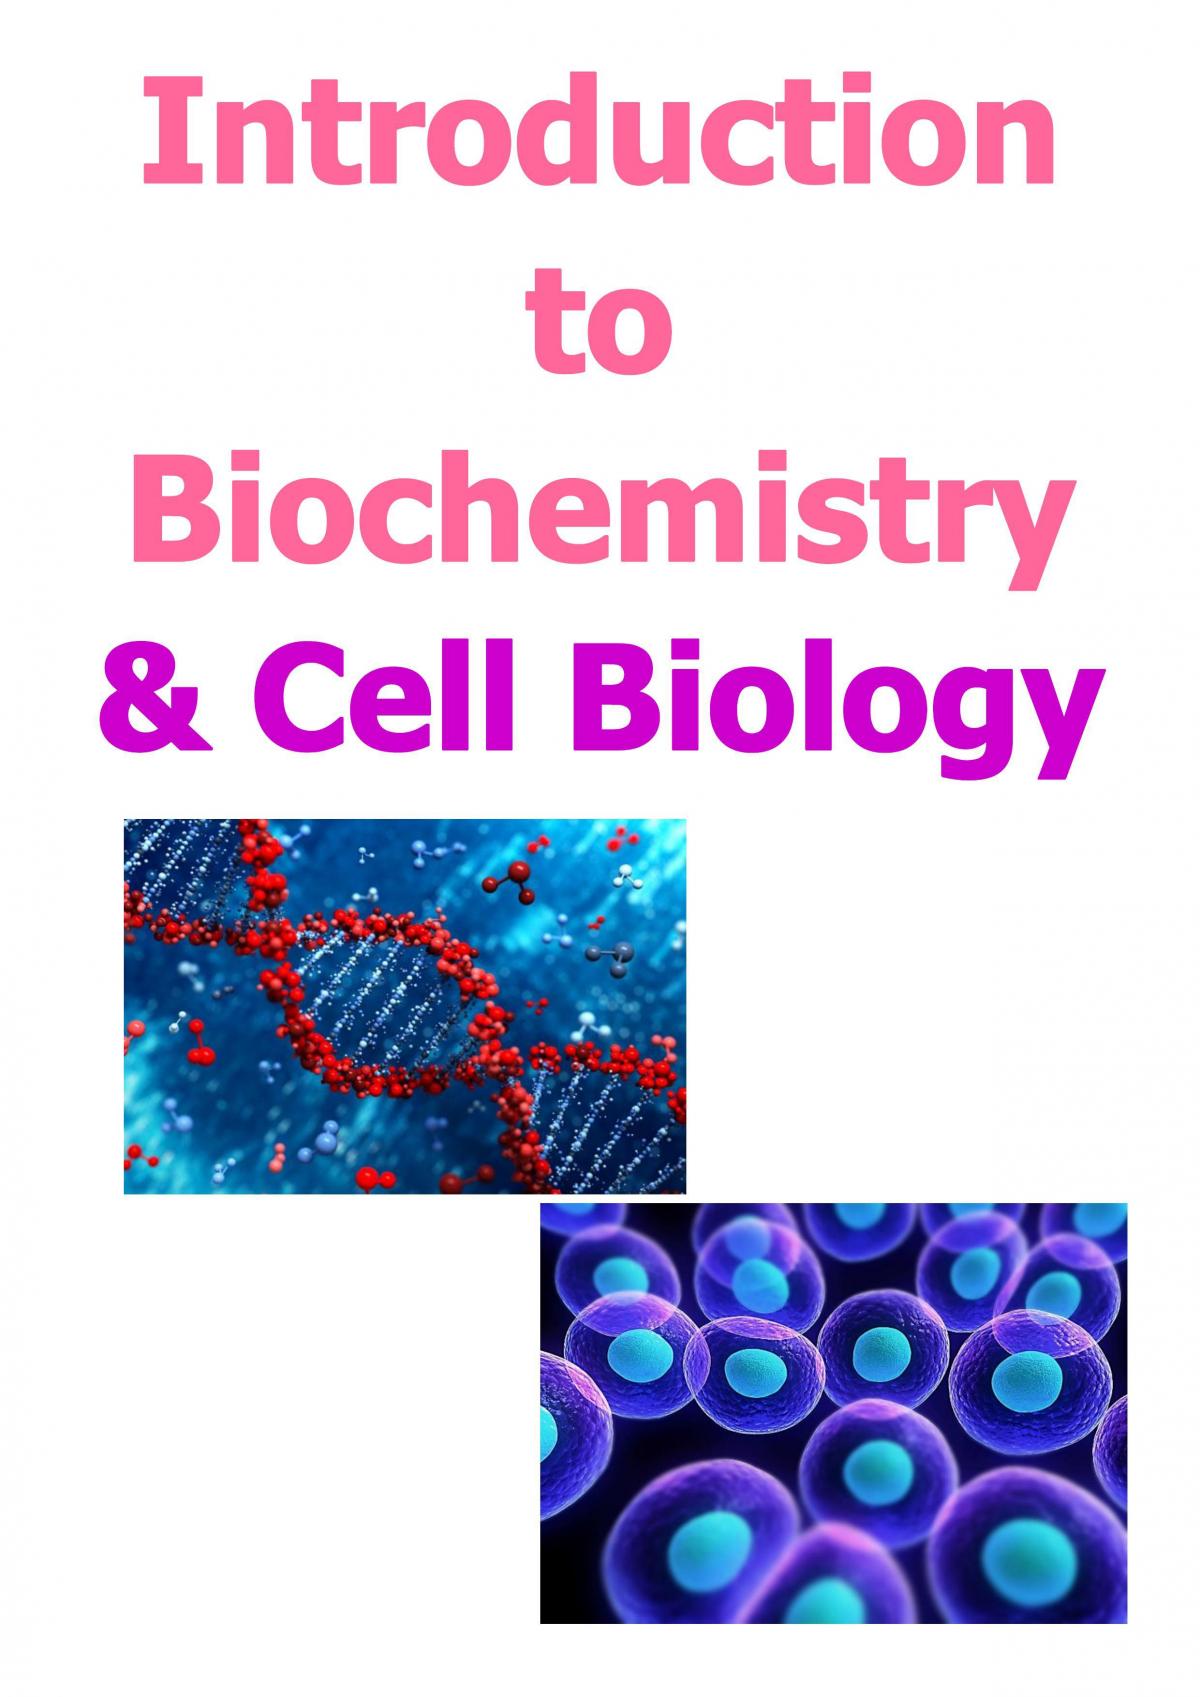 Introduction to Biochemistry and Cell Biology - Page 1